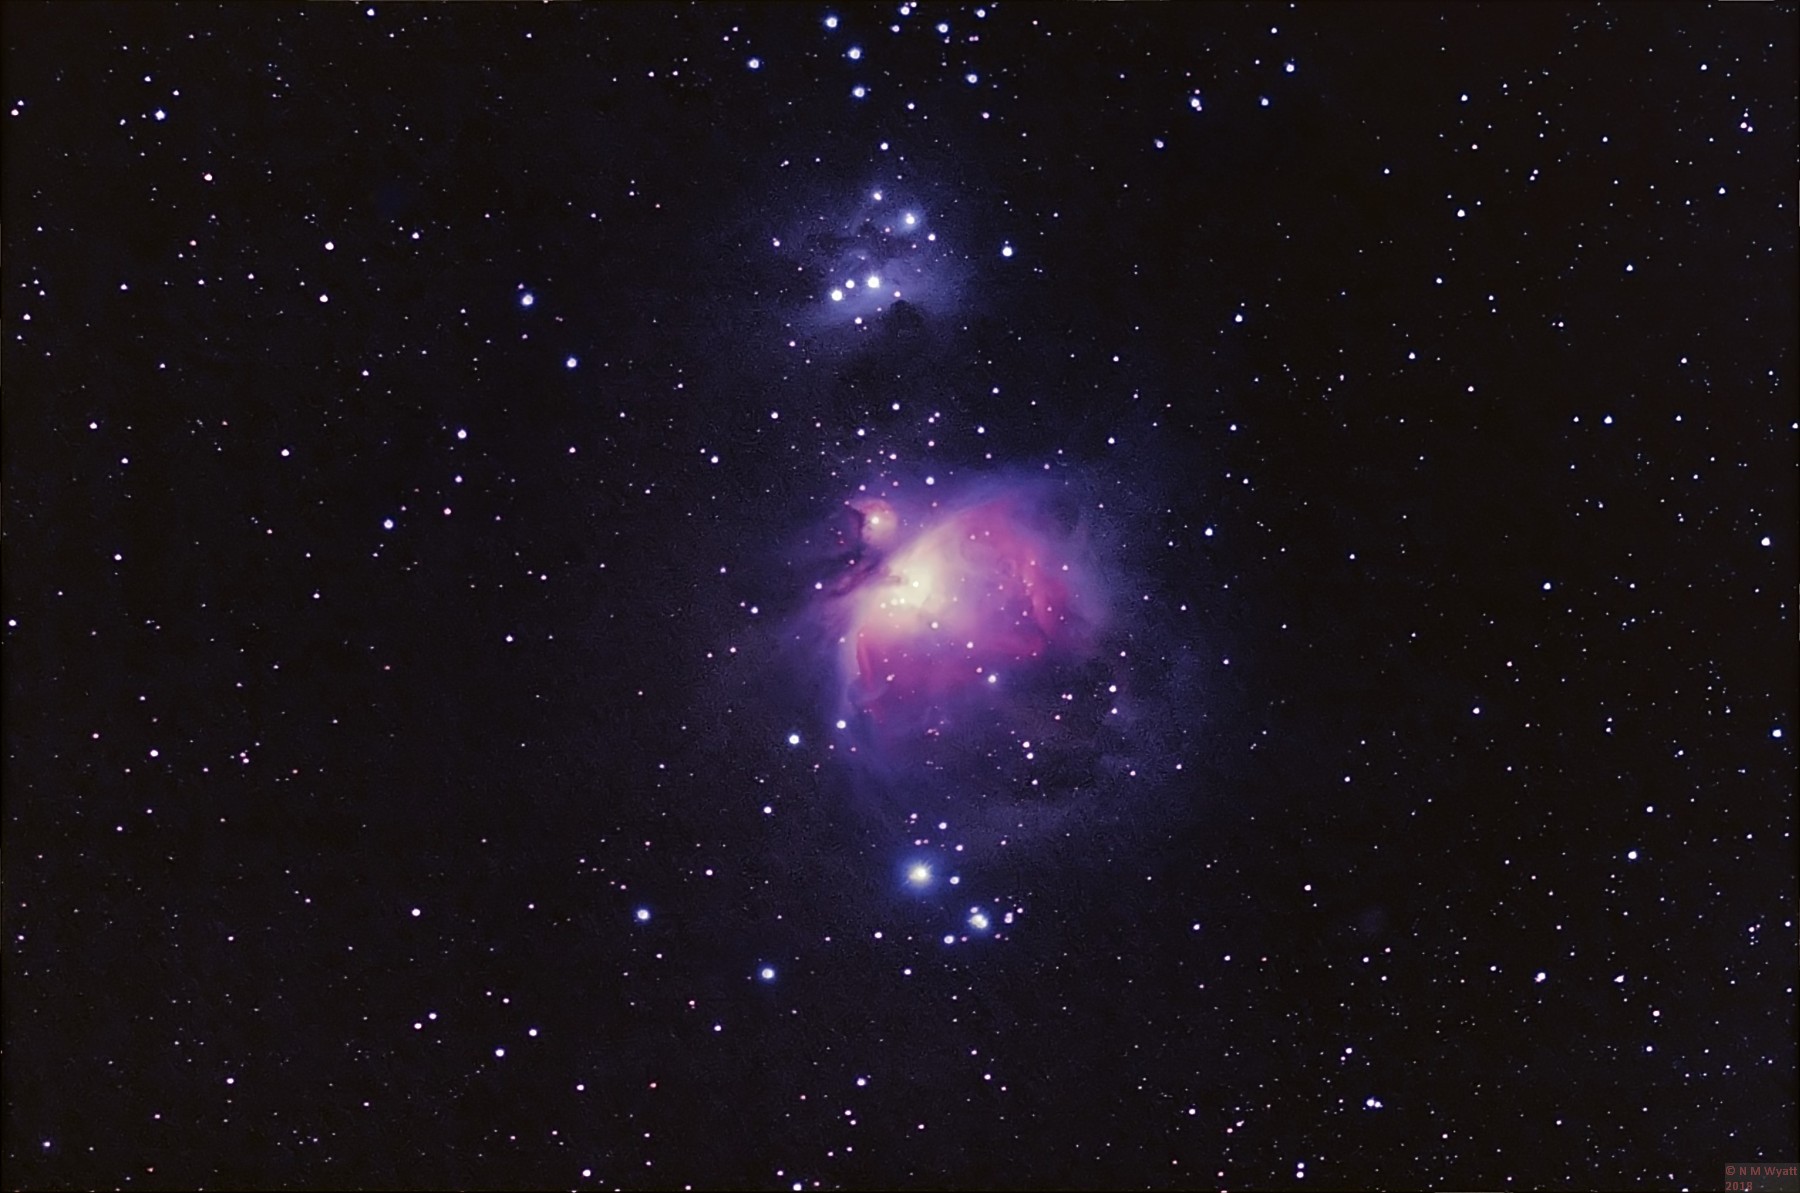 orion nebula reprocessed deconvoluted filtered